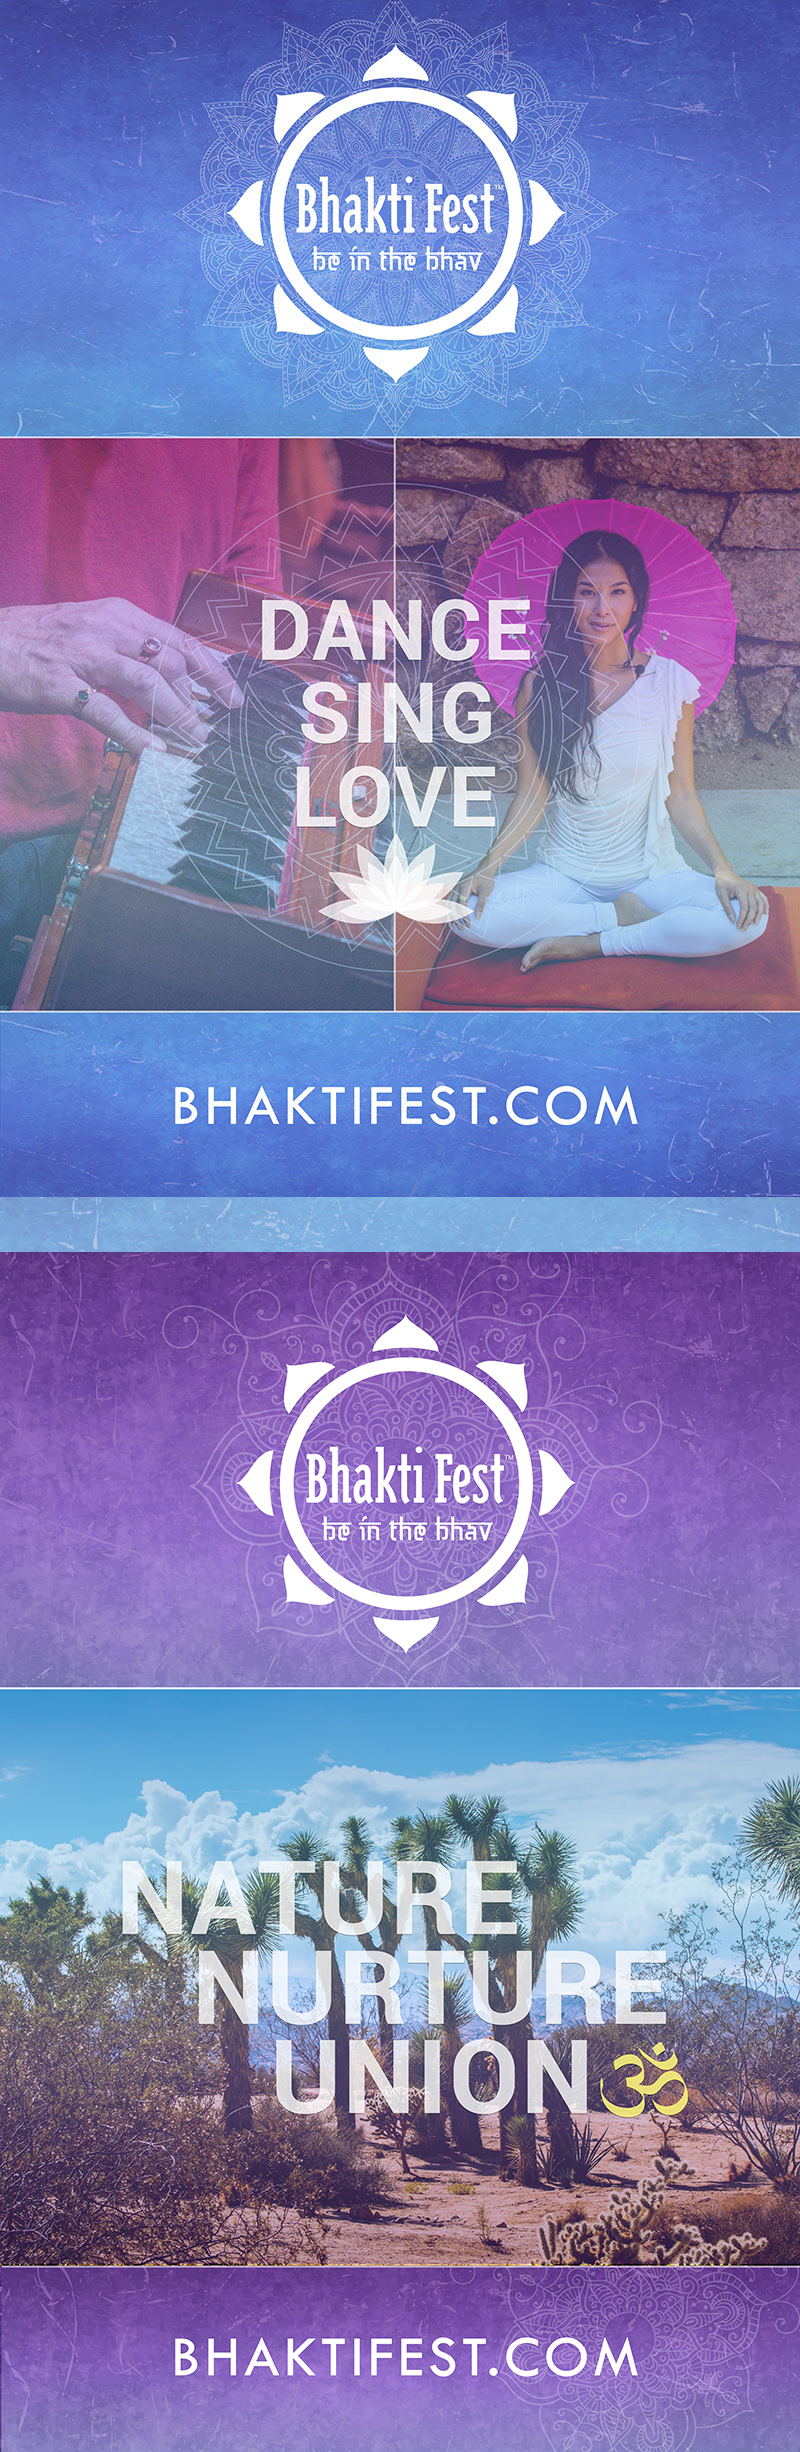 Bhakti Fest Poster by Kelly Weiss on Dribbble